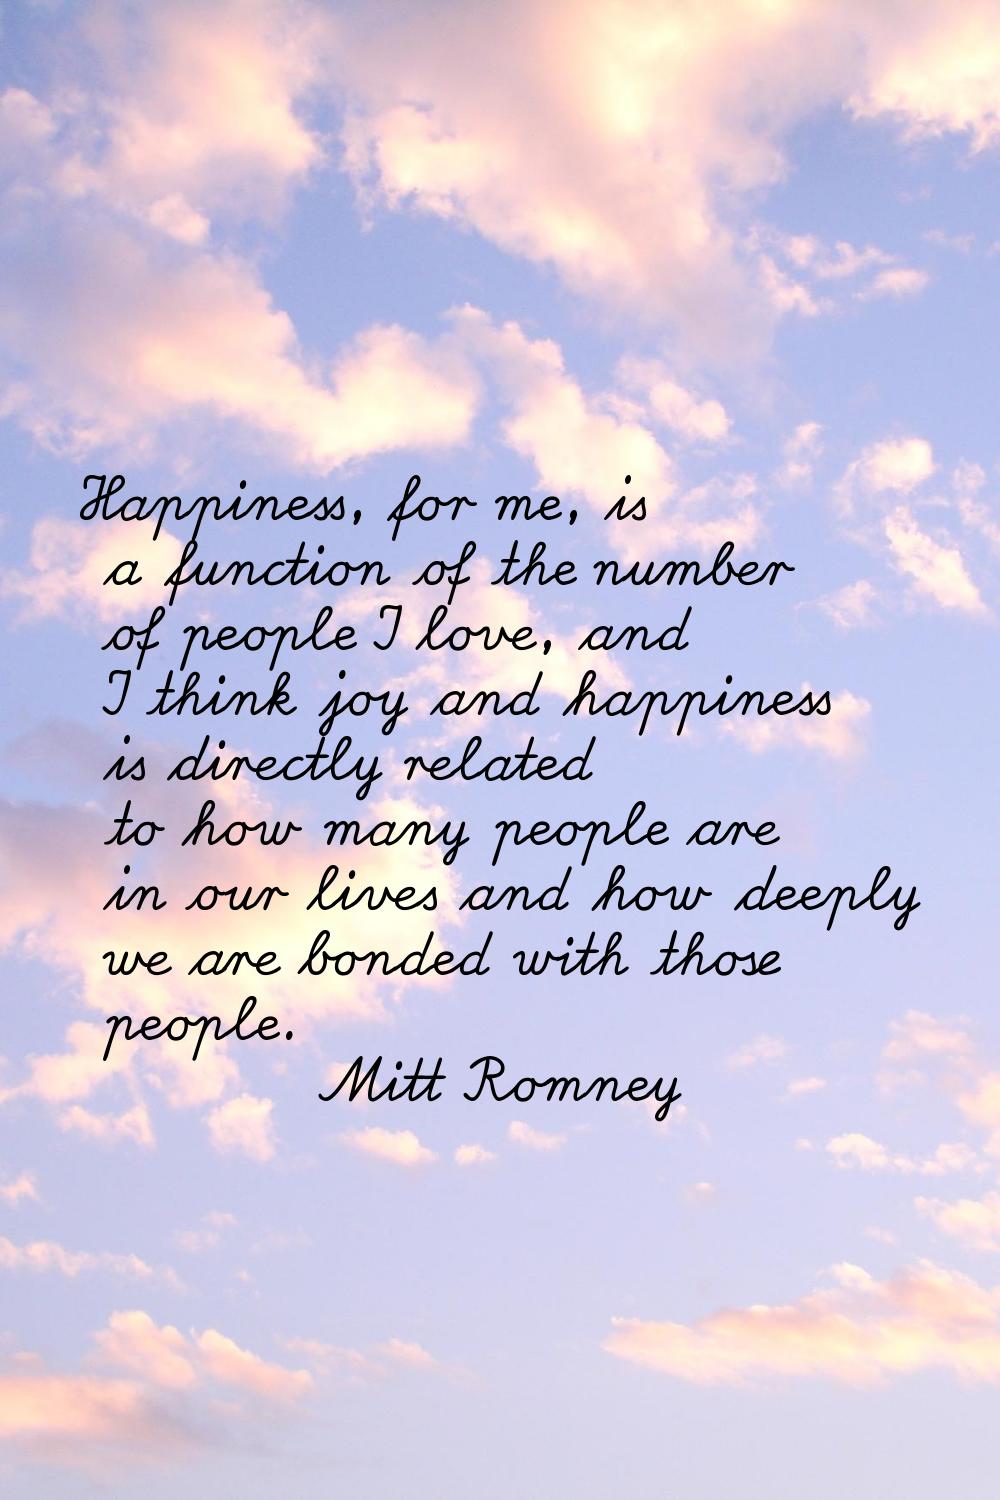 Happiness, for me, is a function of the number of people I love, and I think joy and happiness is d